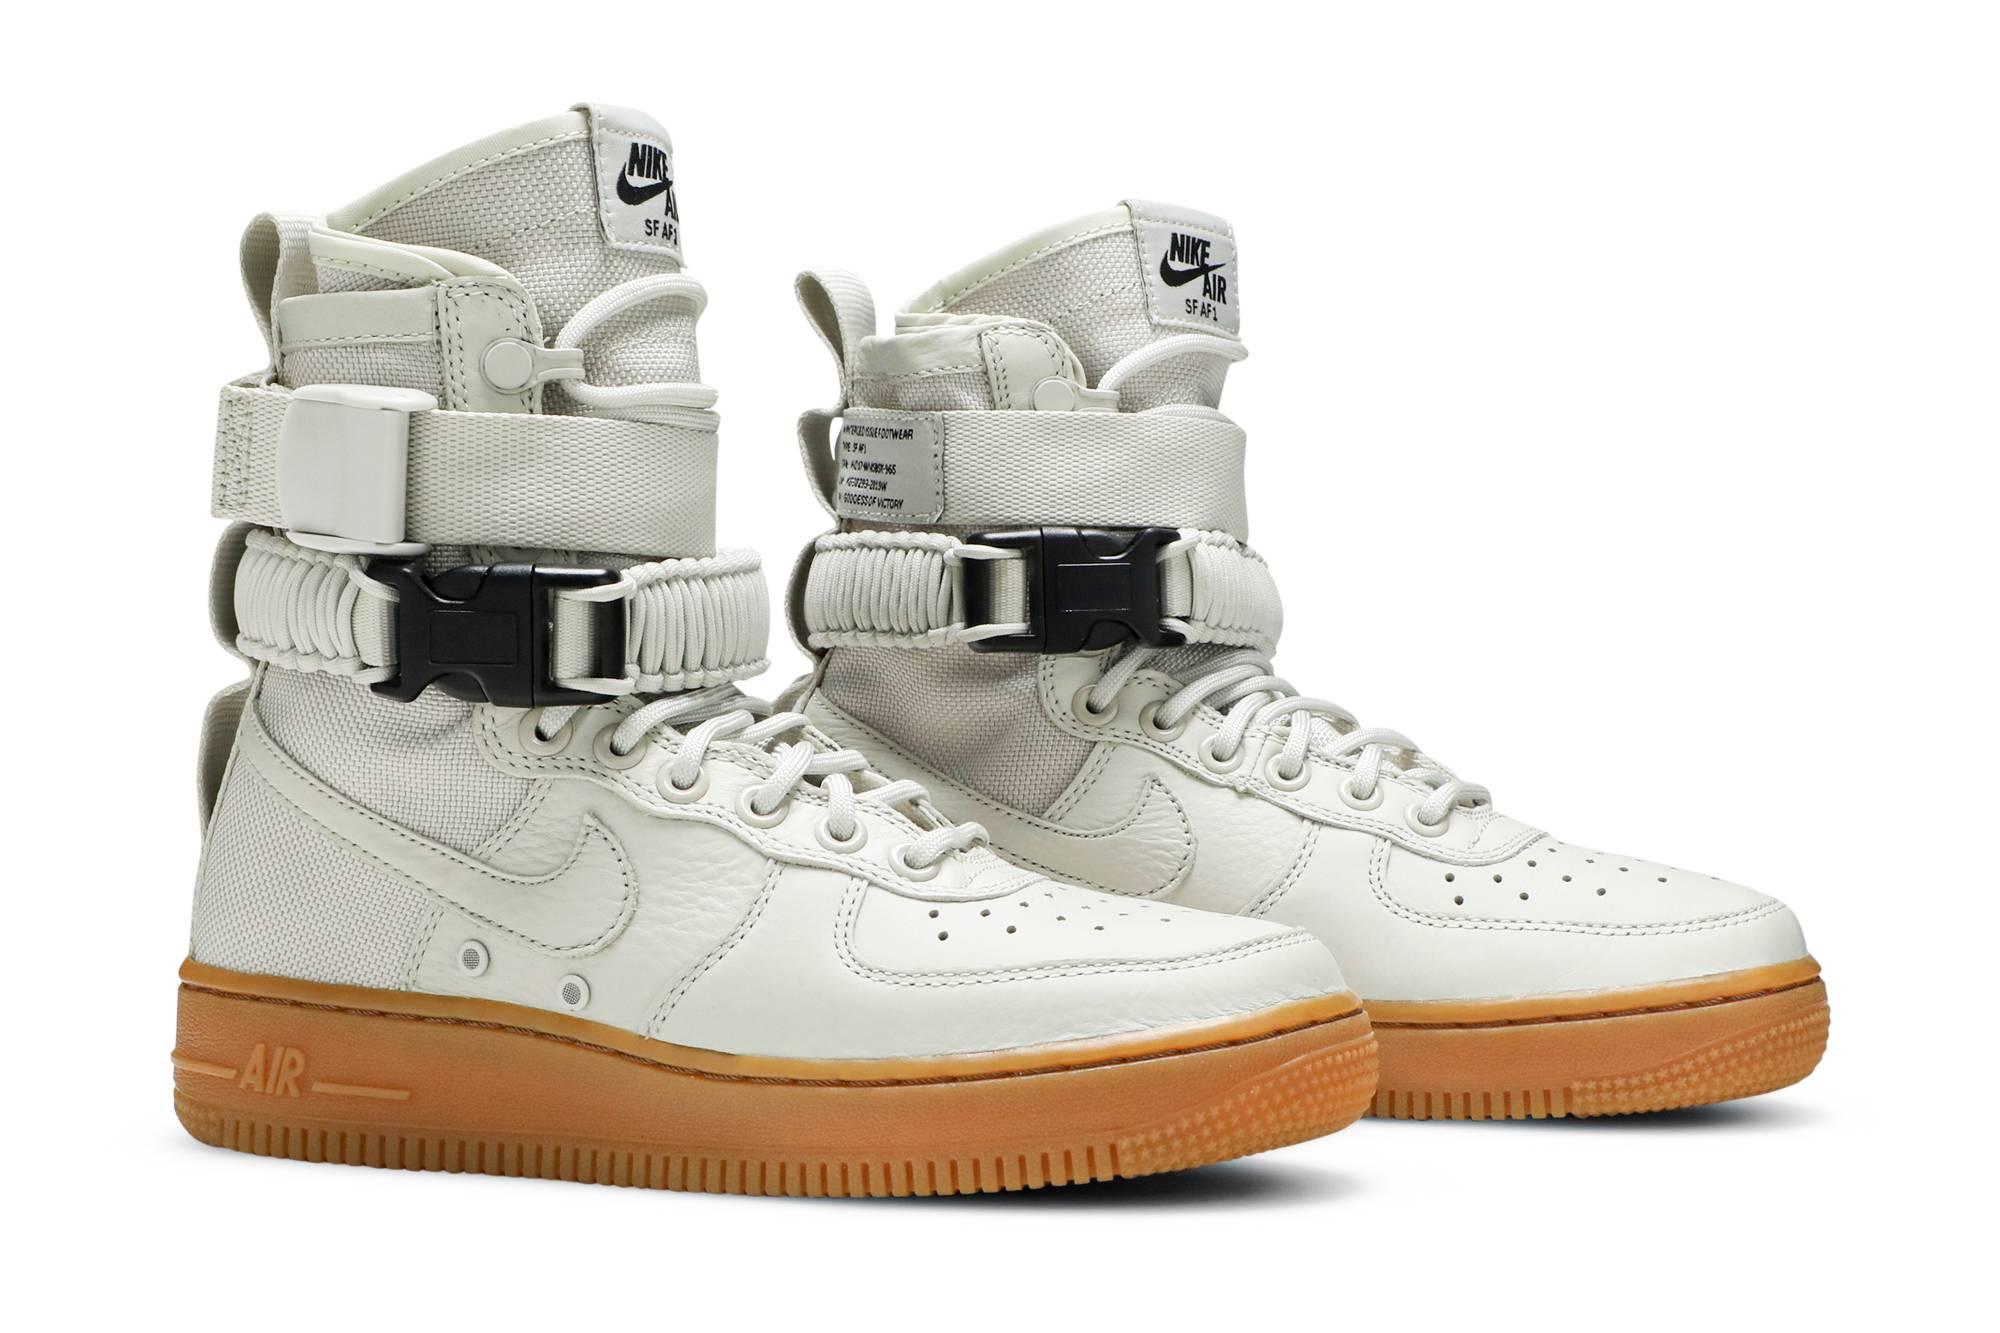 Nike Wmns Sf Air Force 1 High in Grey (Gray) - Lyst